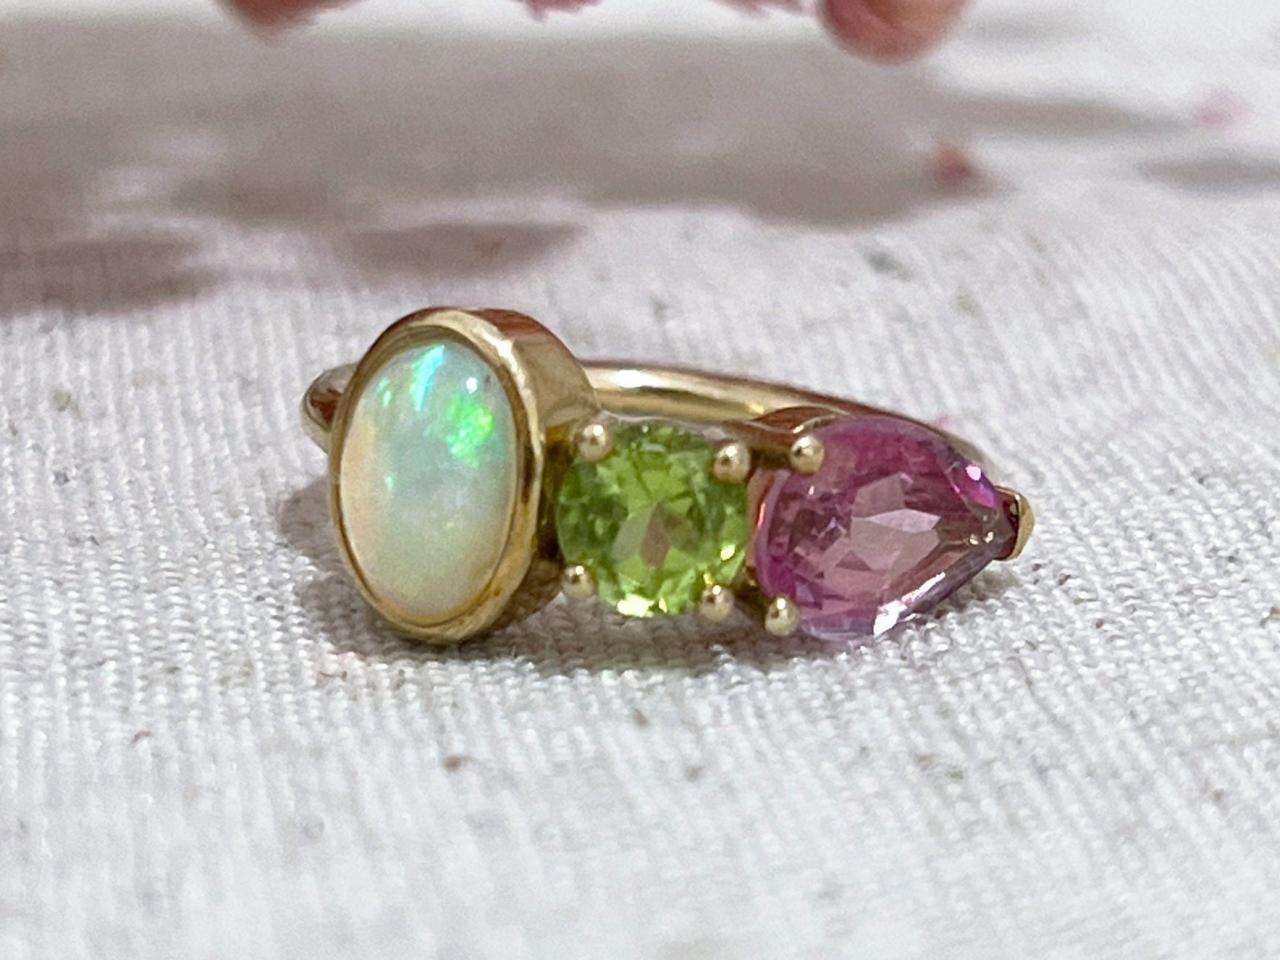 Solid Gold Engagement Ring With 3 Multicolor Stones, Colored Multi Gemstone Bridesmaid Ring, 9k/18k October Birthstone Ring